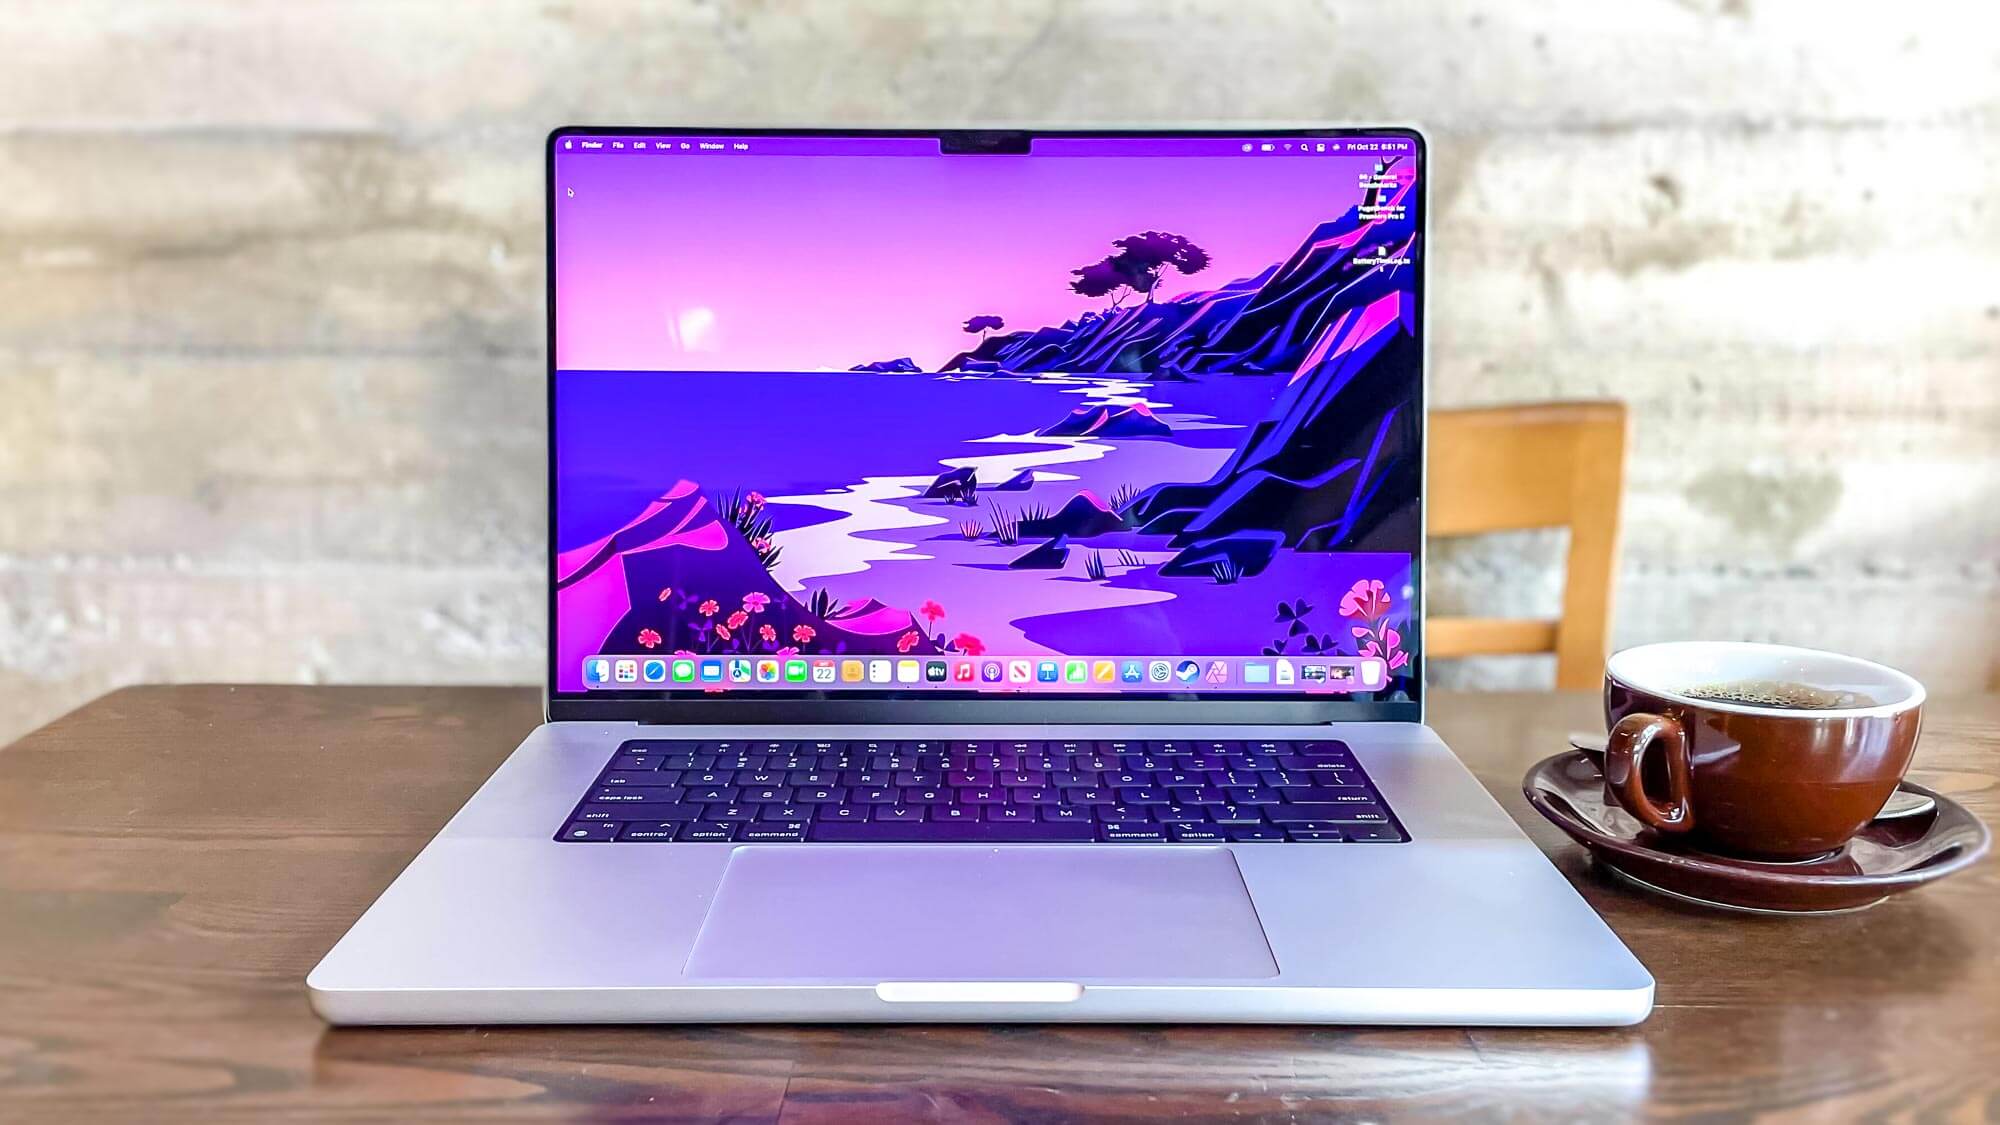 The big brother of the 14-inch MacBook, the 16-inch MacBook Pro's bigger size makes it harder to carry around. In spite of this, the M1 chip makes it a fantastic choice of laptops for music production.